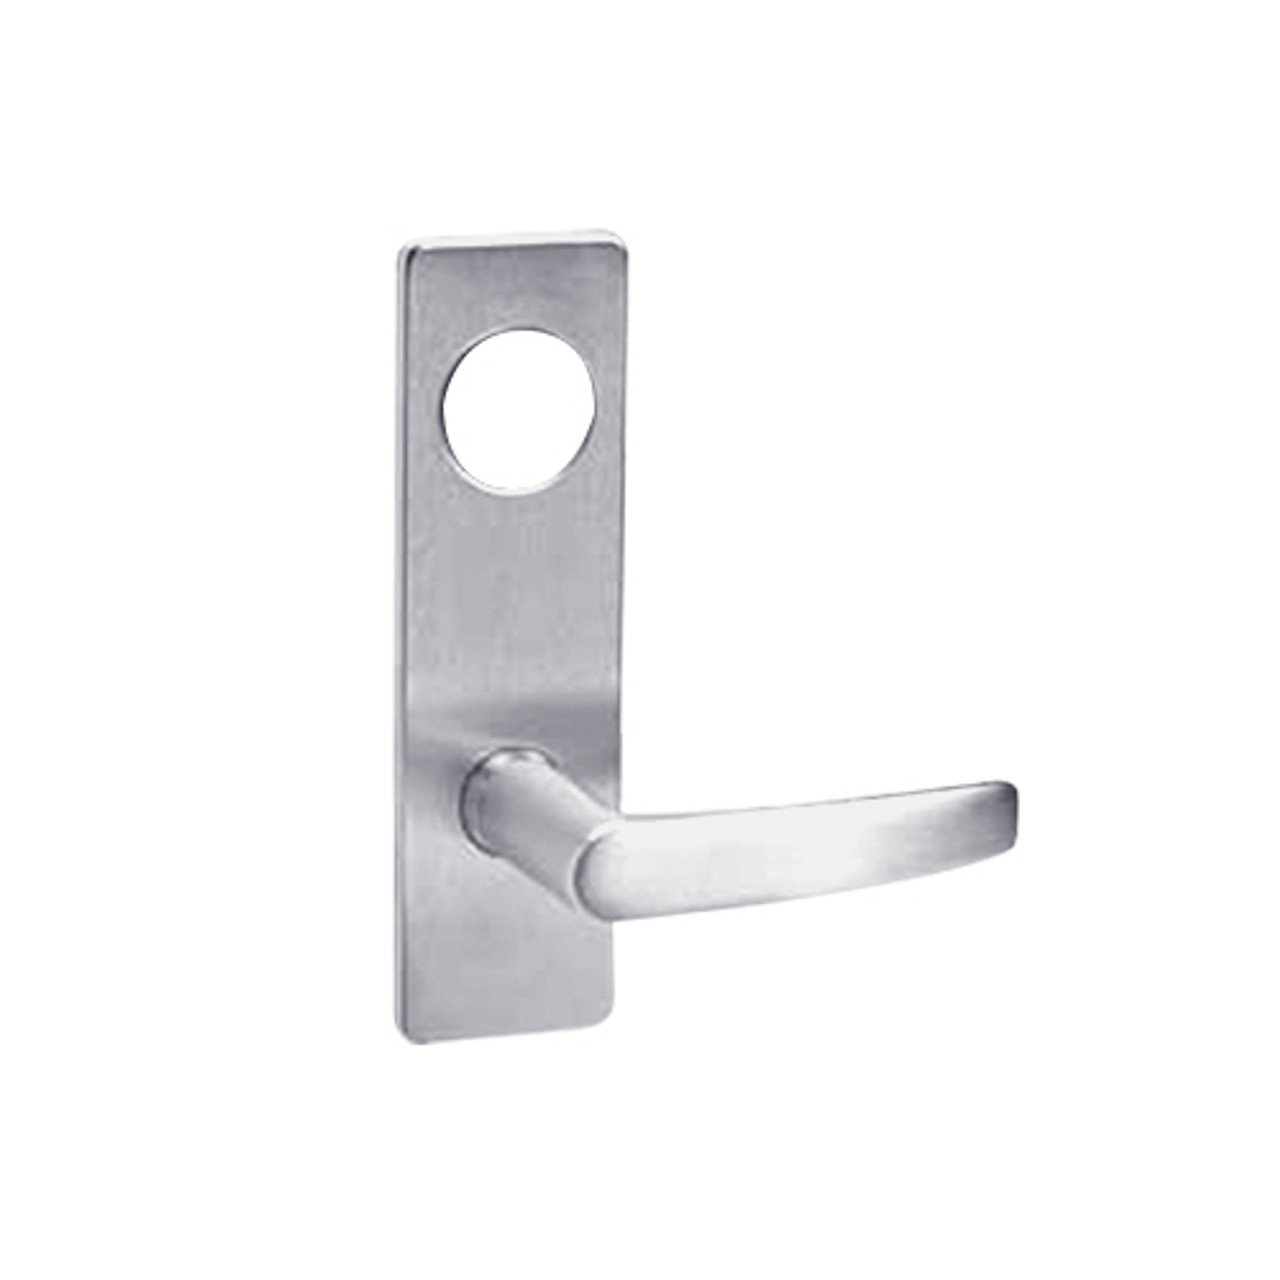 ML2054-ASM-626-CL7 Corbin Russwin ML2000 Series IC 7-Pin Less Core Mortise Entrance Locksets with Armstrong Lever in Satin Chrome